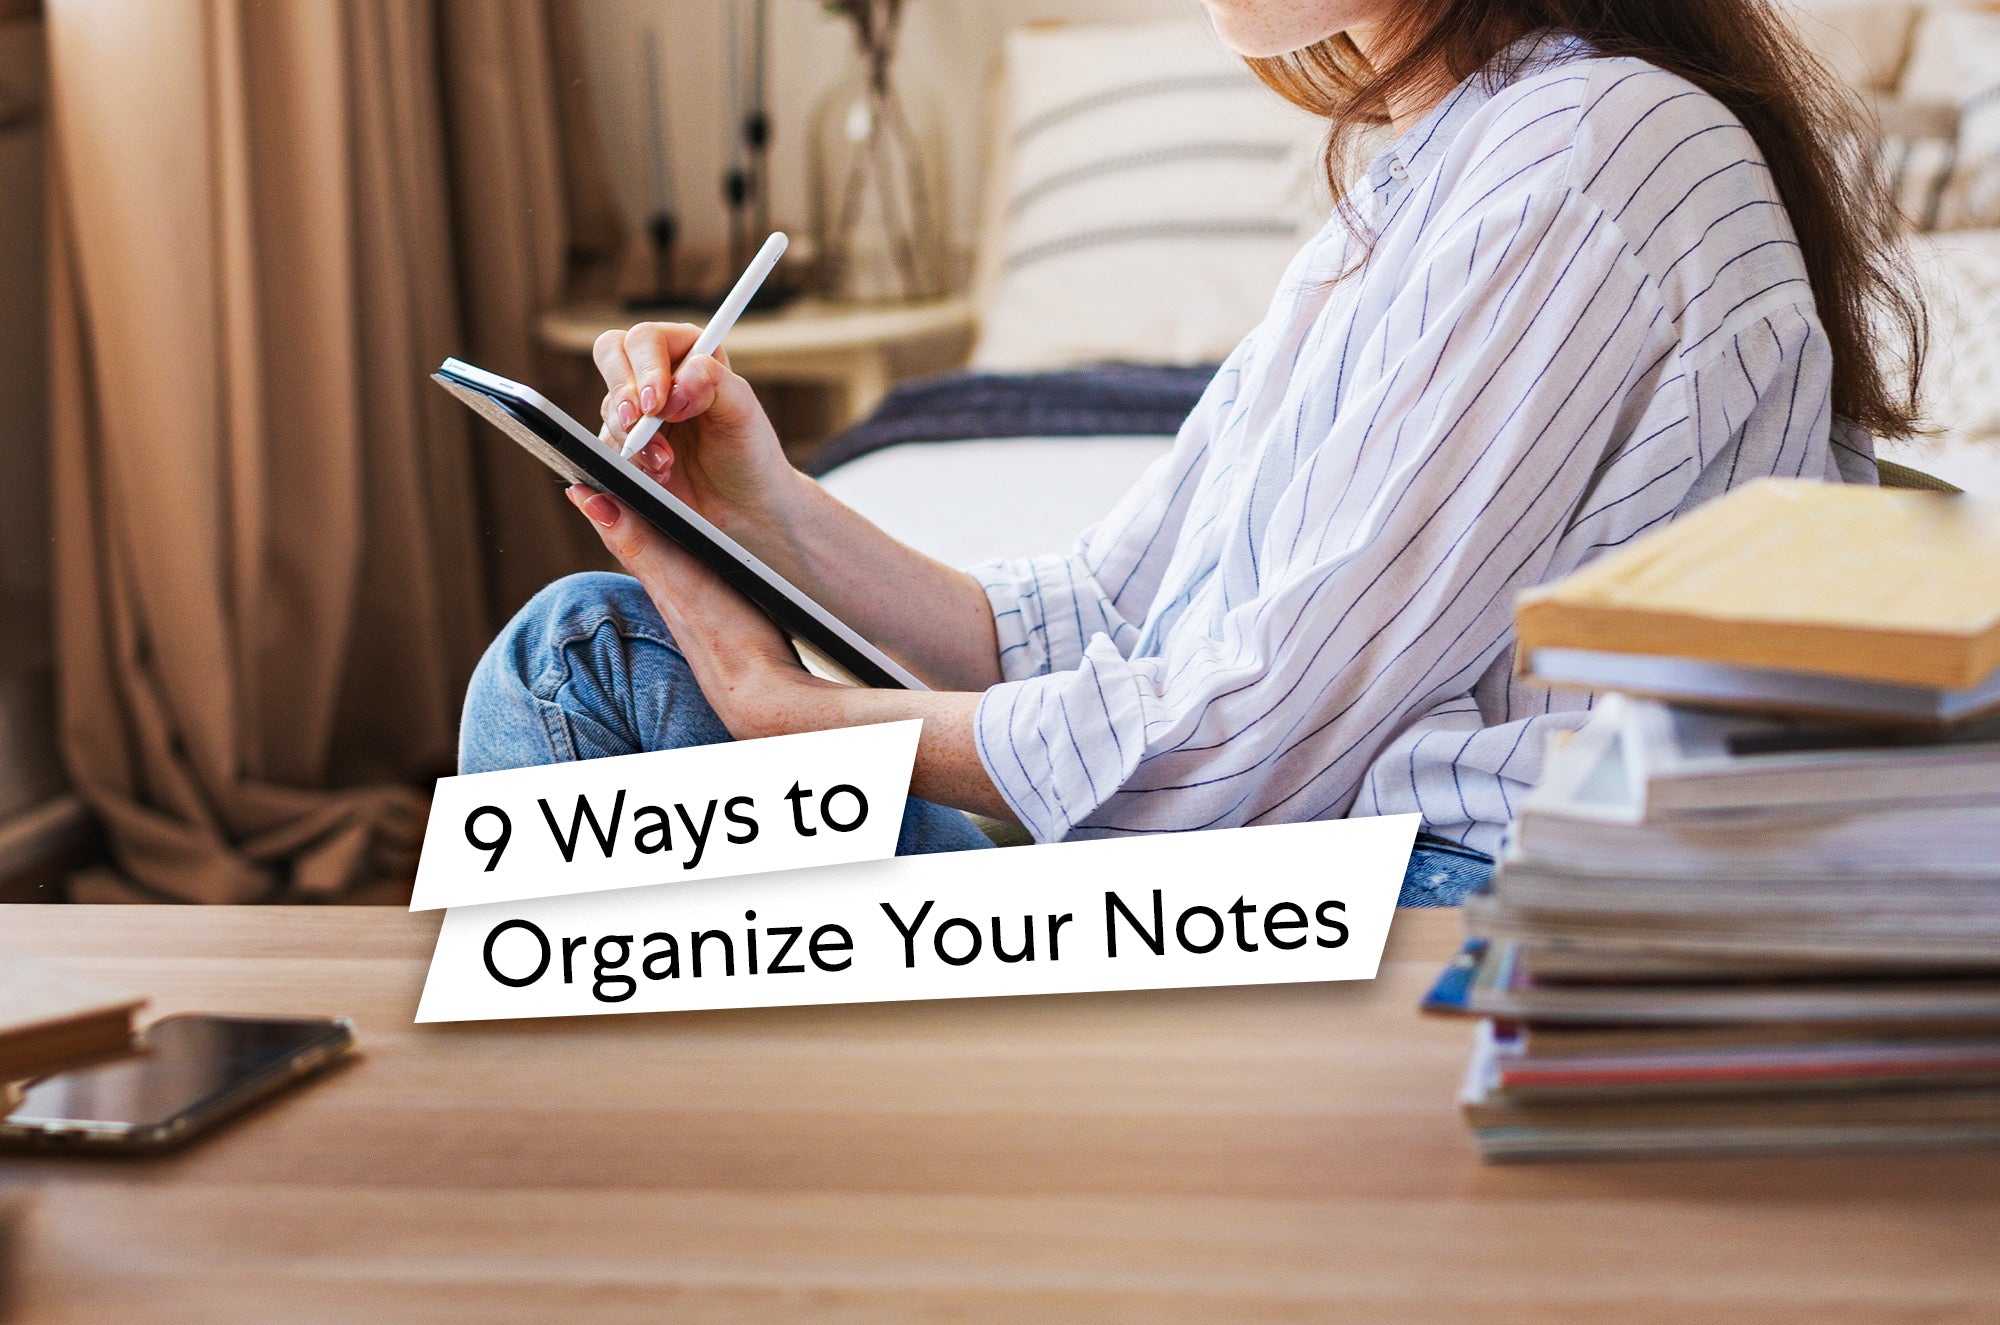 Note Taking Essentials: How to Keep Organized and Effective Notes